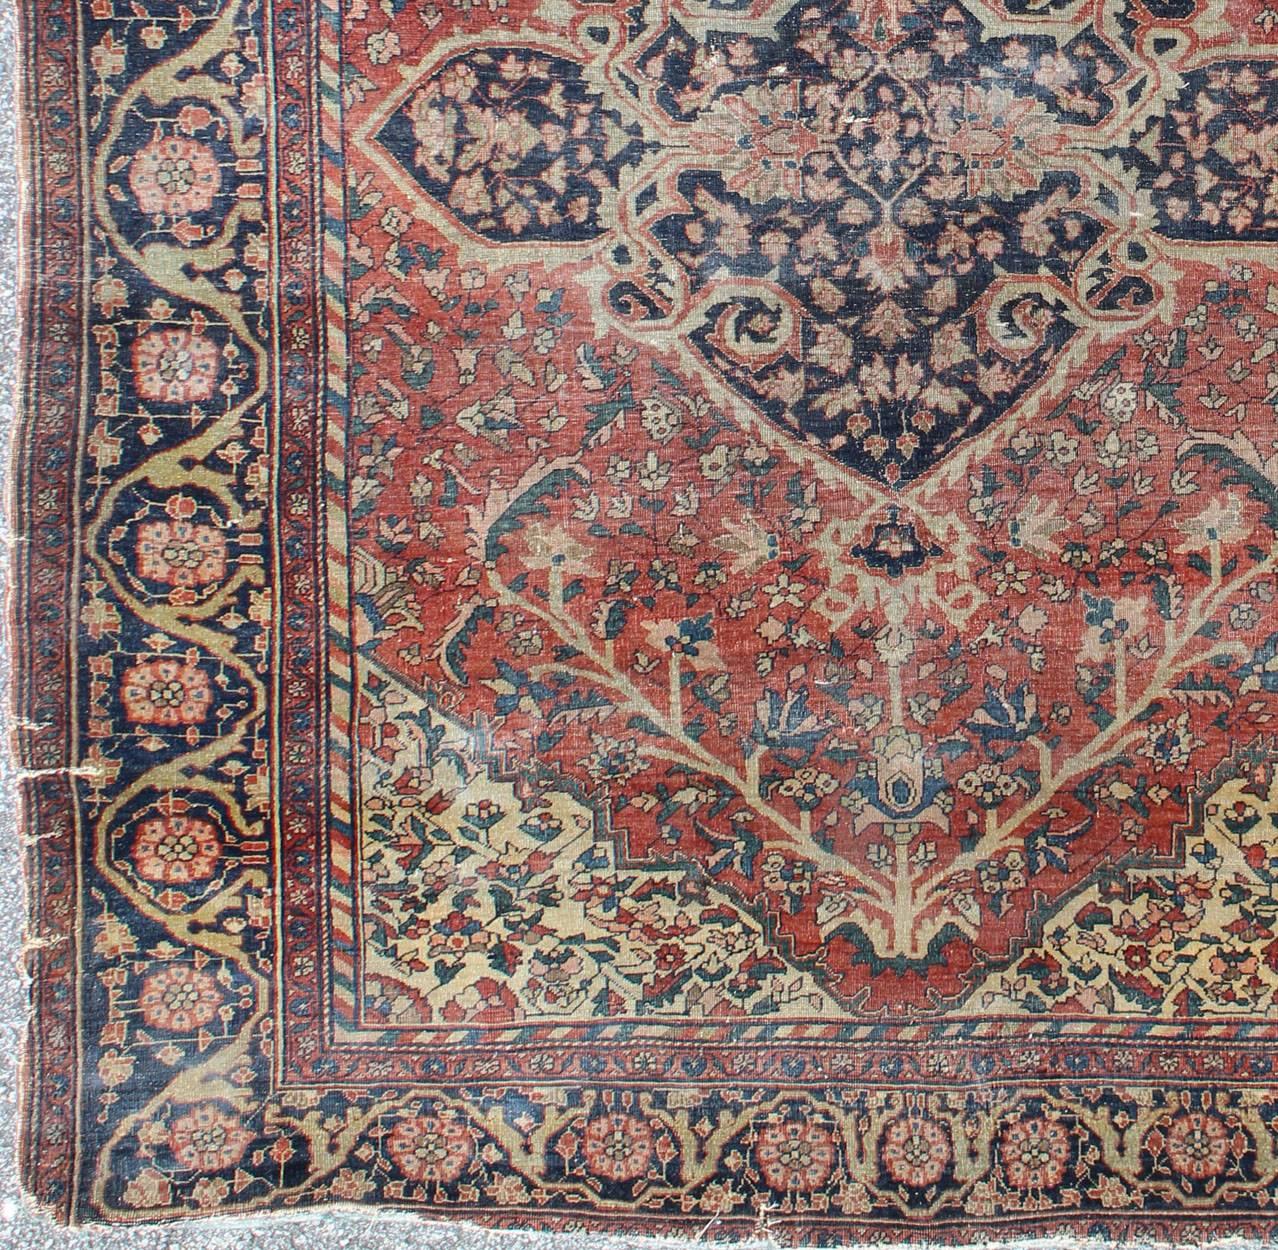 This outstanding antique Farahan Sarouk carpet is primarily characterized by its classical composition. This beautiful carpet represents the highest levels of mastery achieved by Persian weavers. It showcases floral elements and vine scrolls that